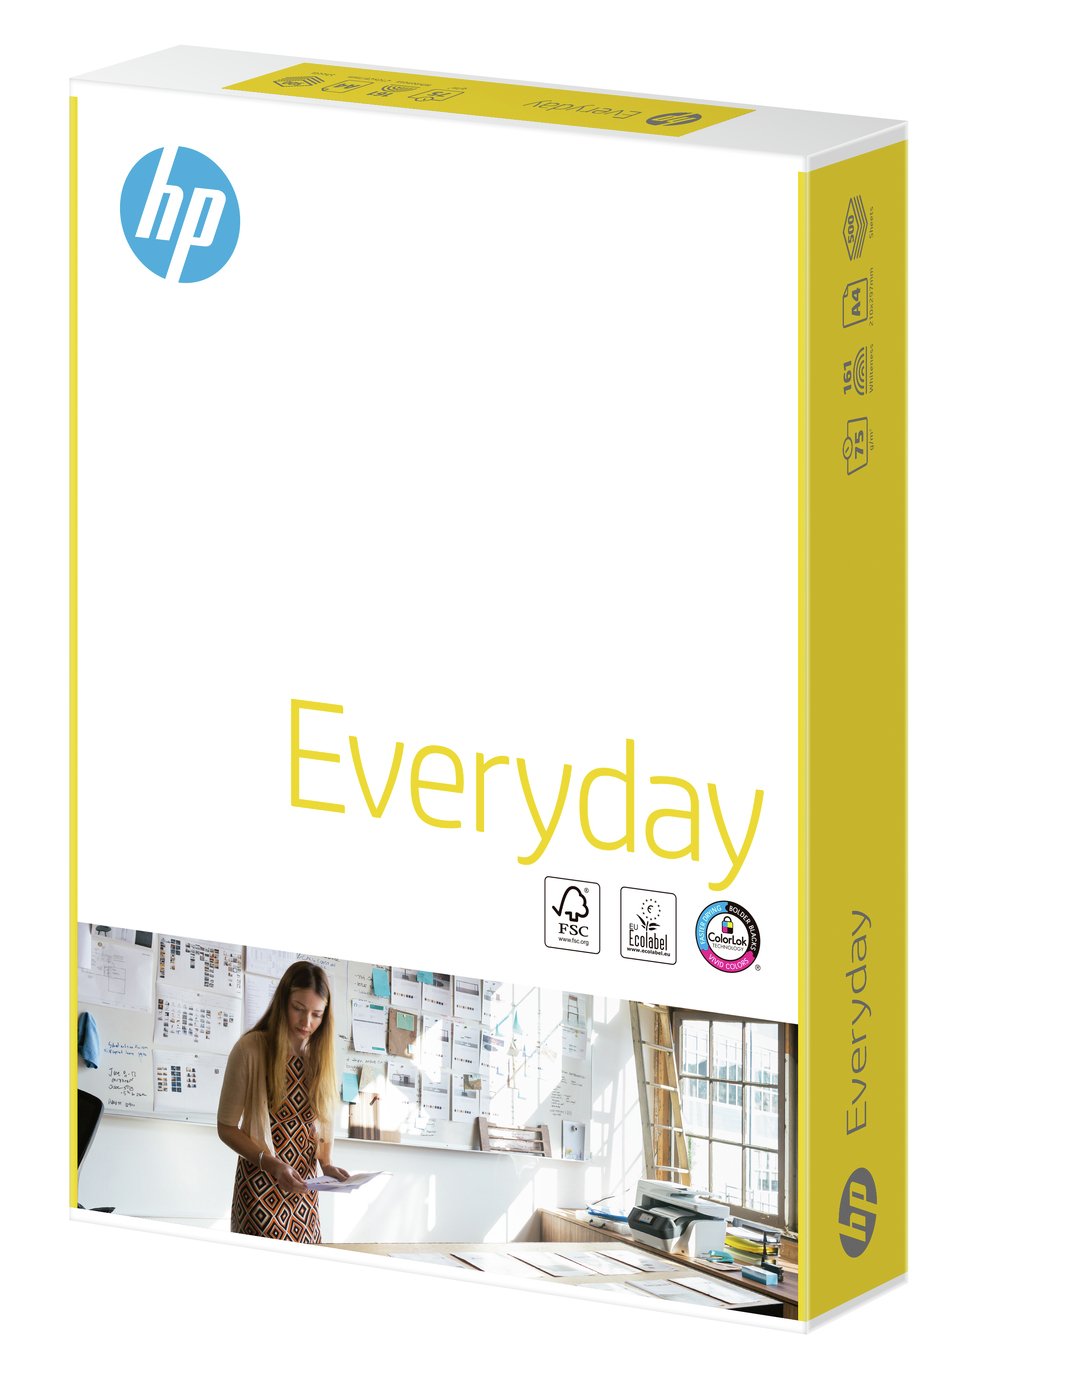 HP Everyday A4 Printer Paper review